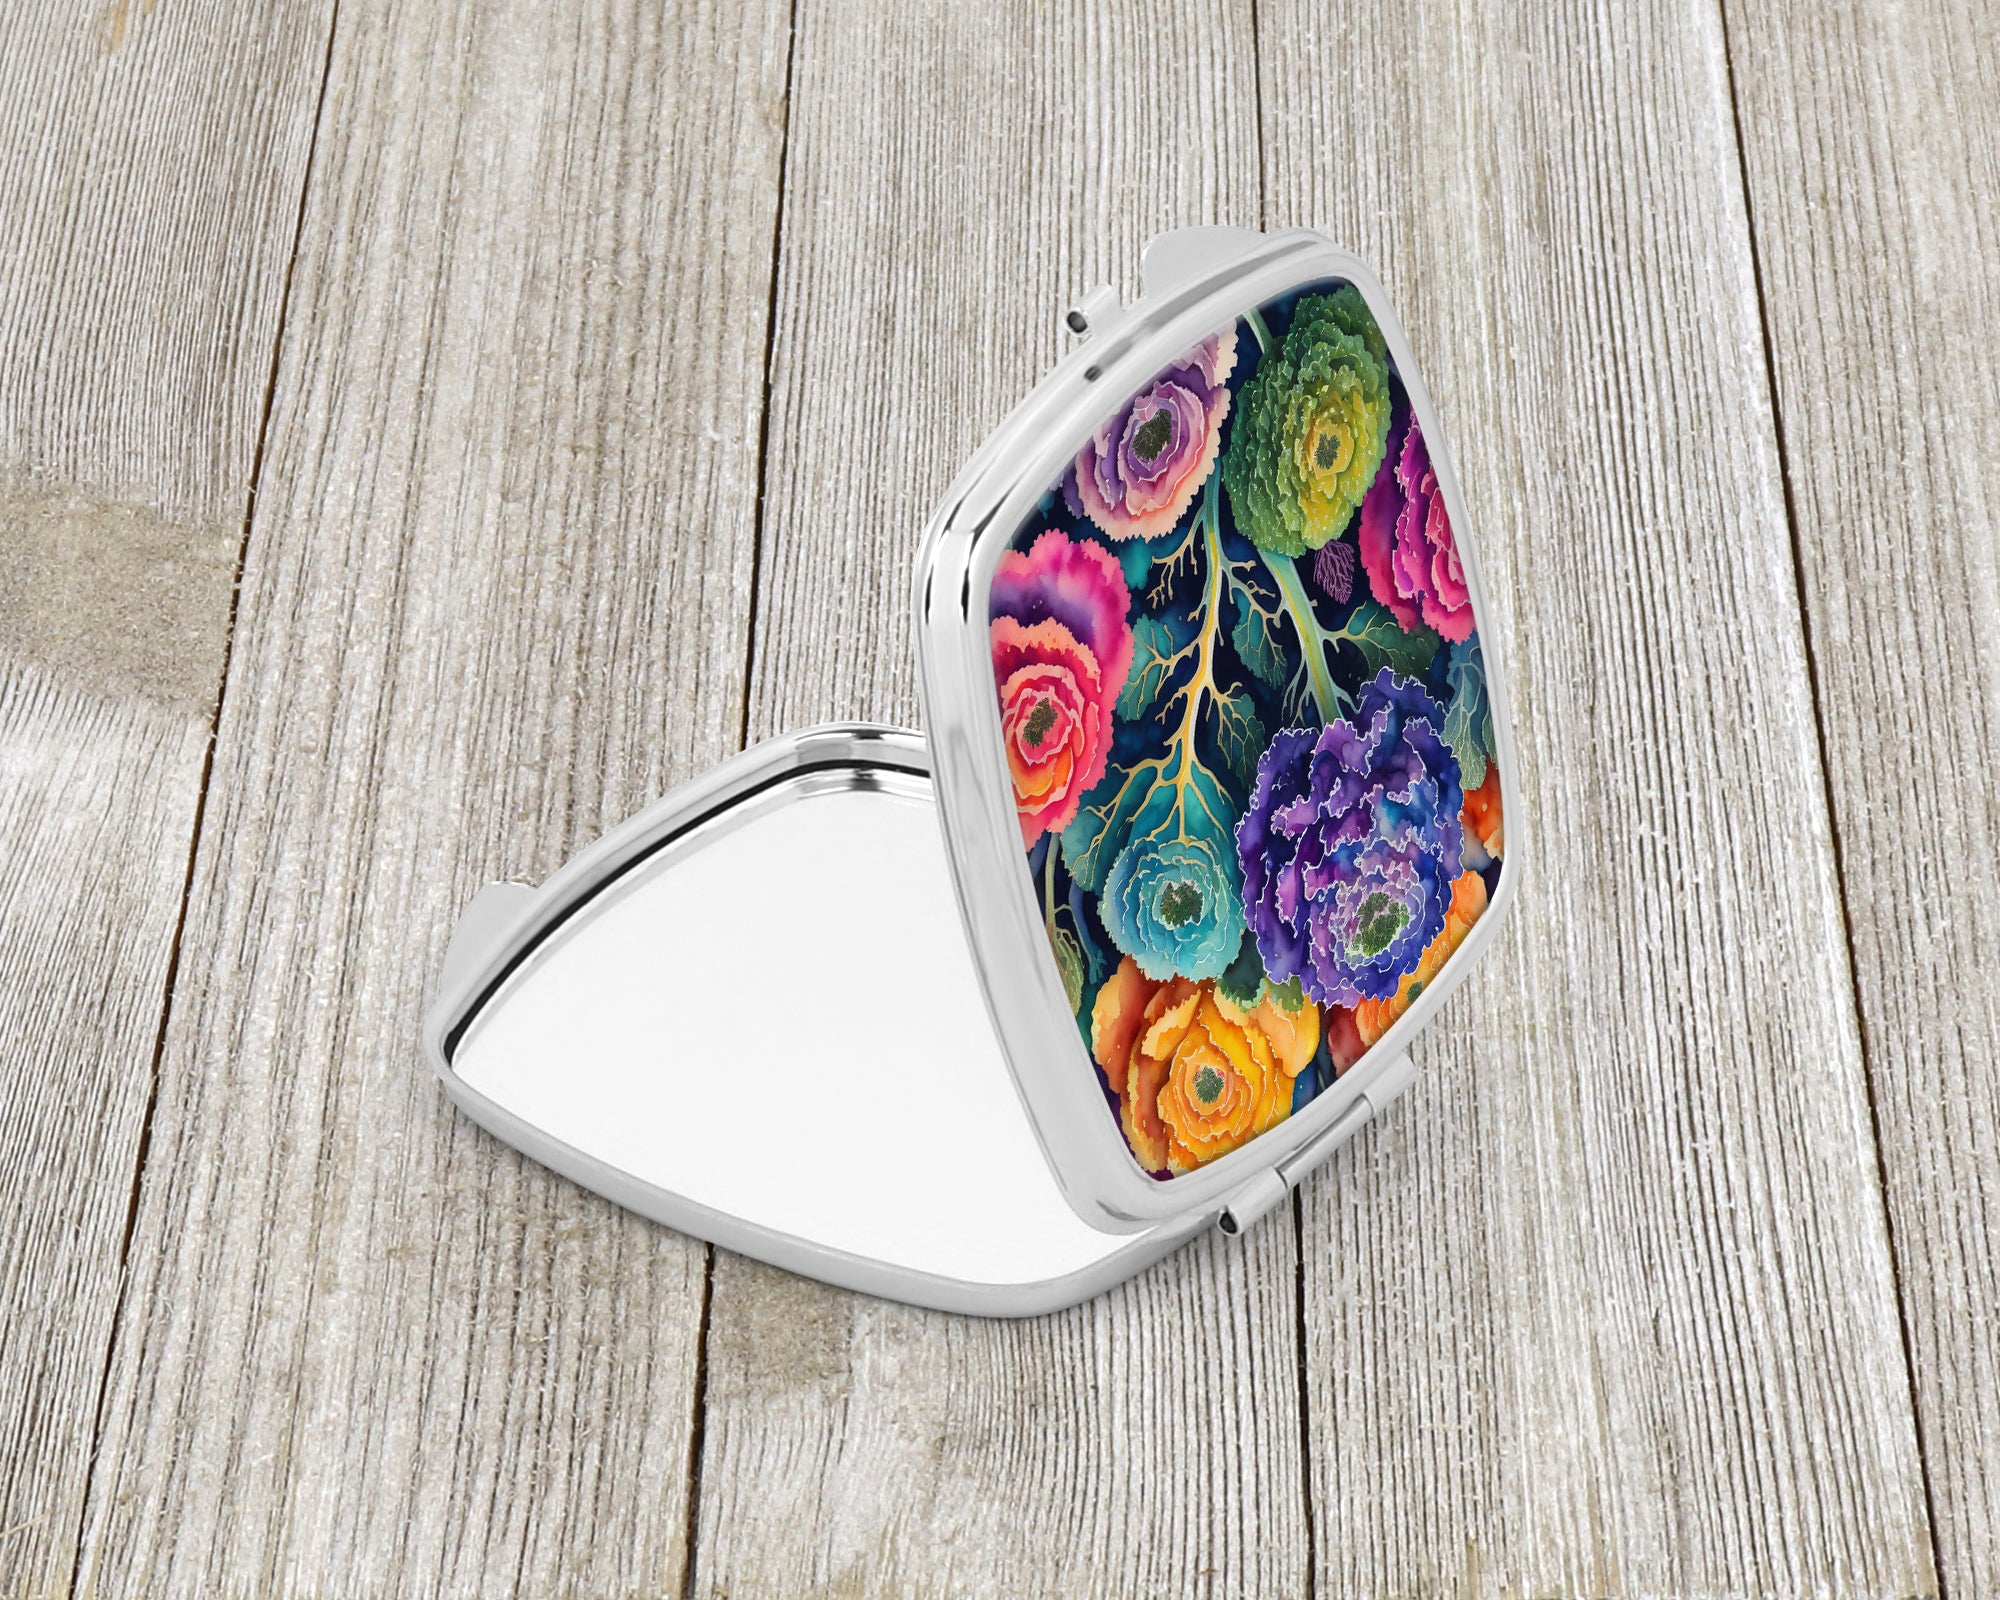 Buy this Colorful Ornamental Kale Compact Mirror